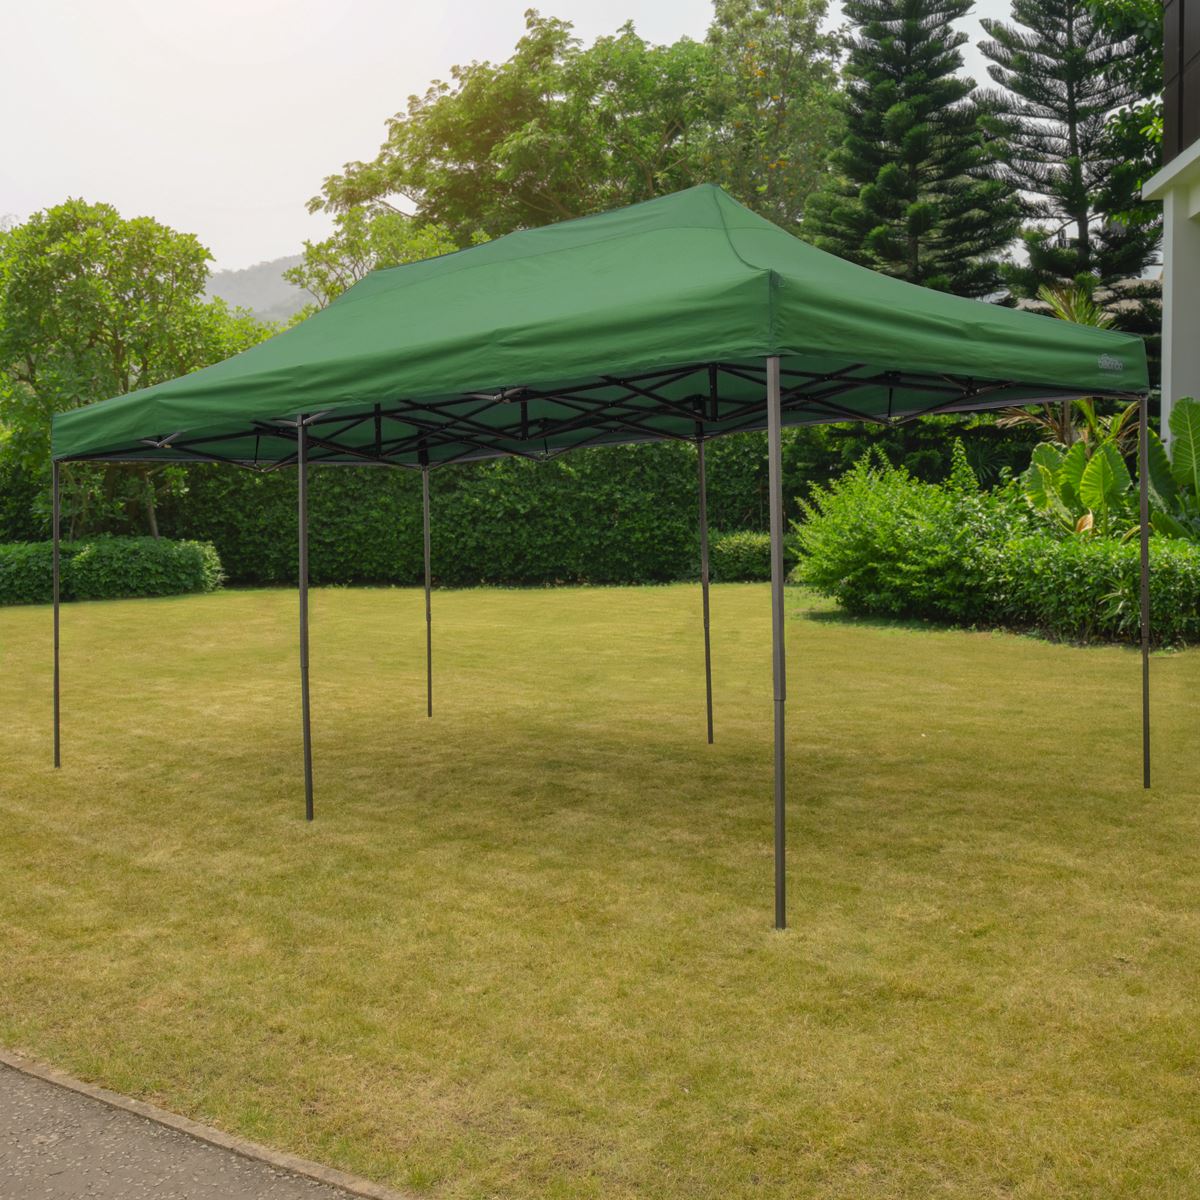 Dellonda Premium 3x6m Pop-Up Gazebo, Heavy Duty, PVC Coated, Water Resistant Fabric, Supplied with Carry Bag, Rope, Stakes & Weight Bags - Dark Green Canopy